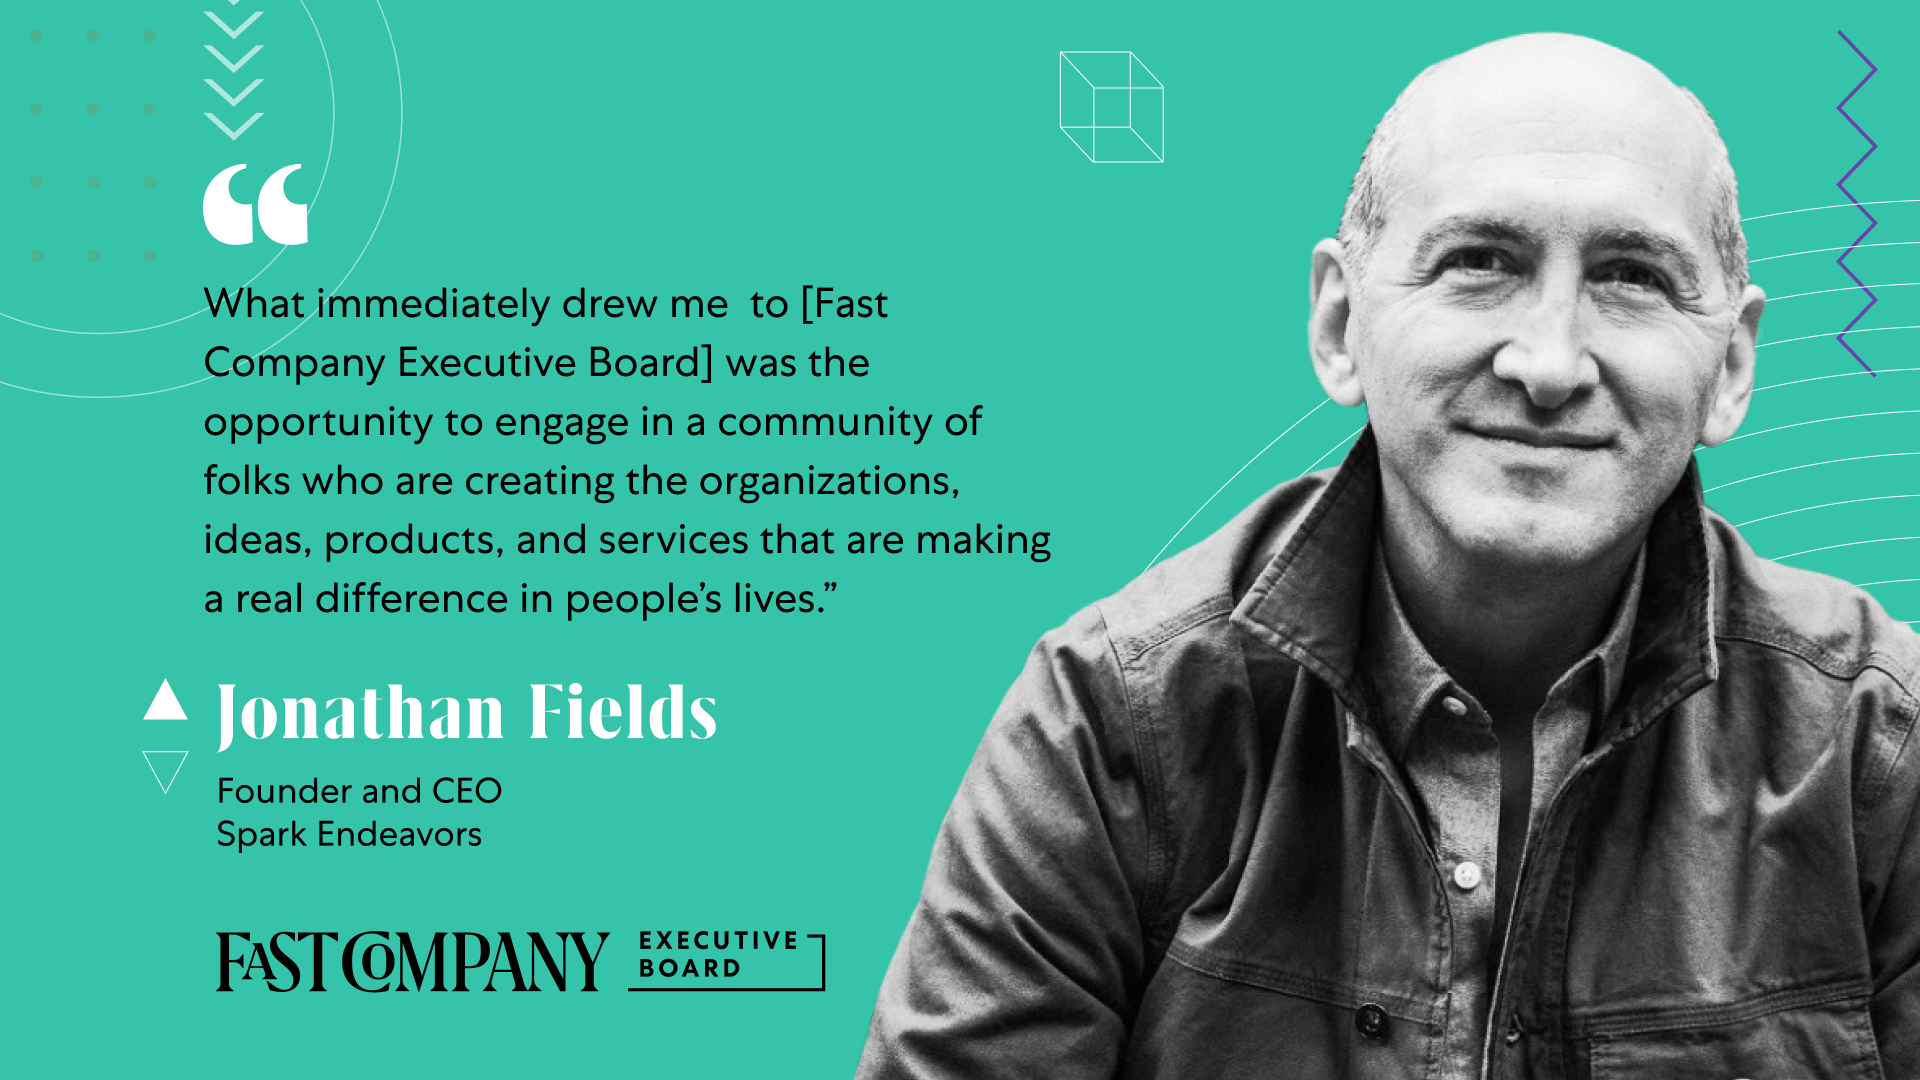 Jonathan Fields Drawn to Fast Company Executive Board’s Insightful and Highly Curated Community